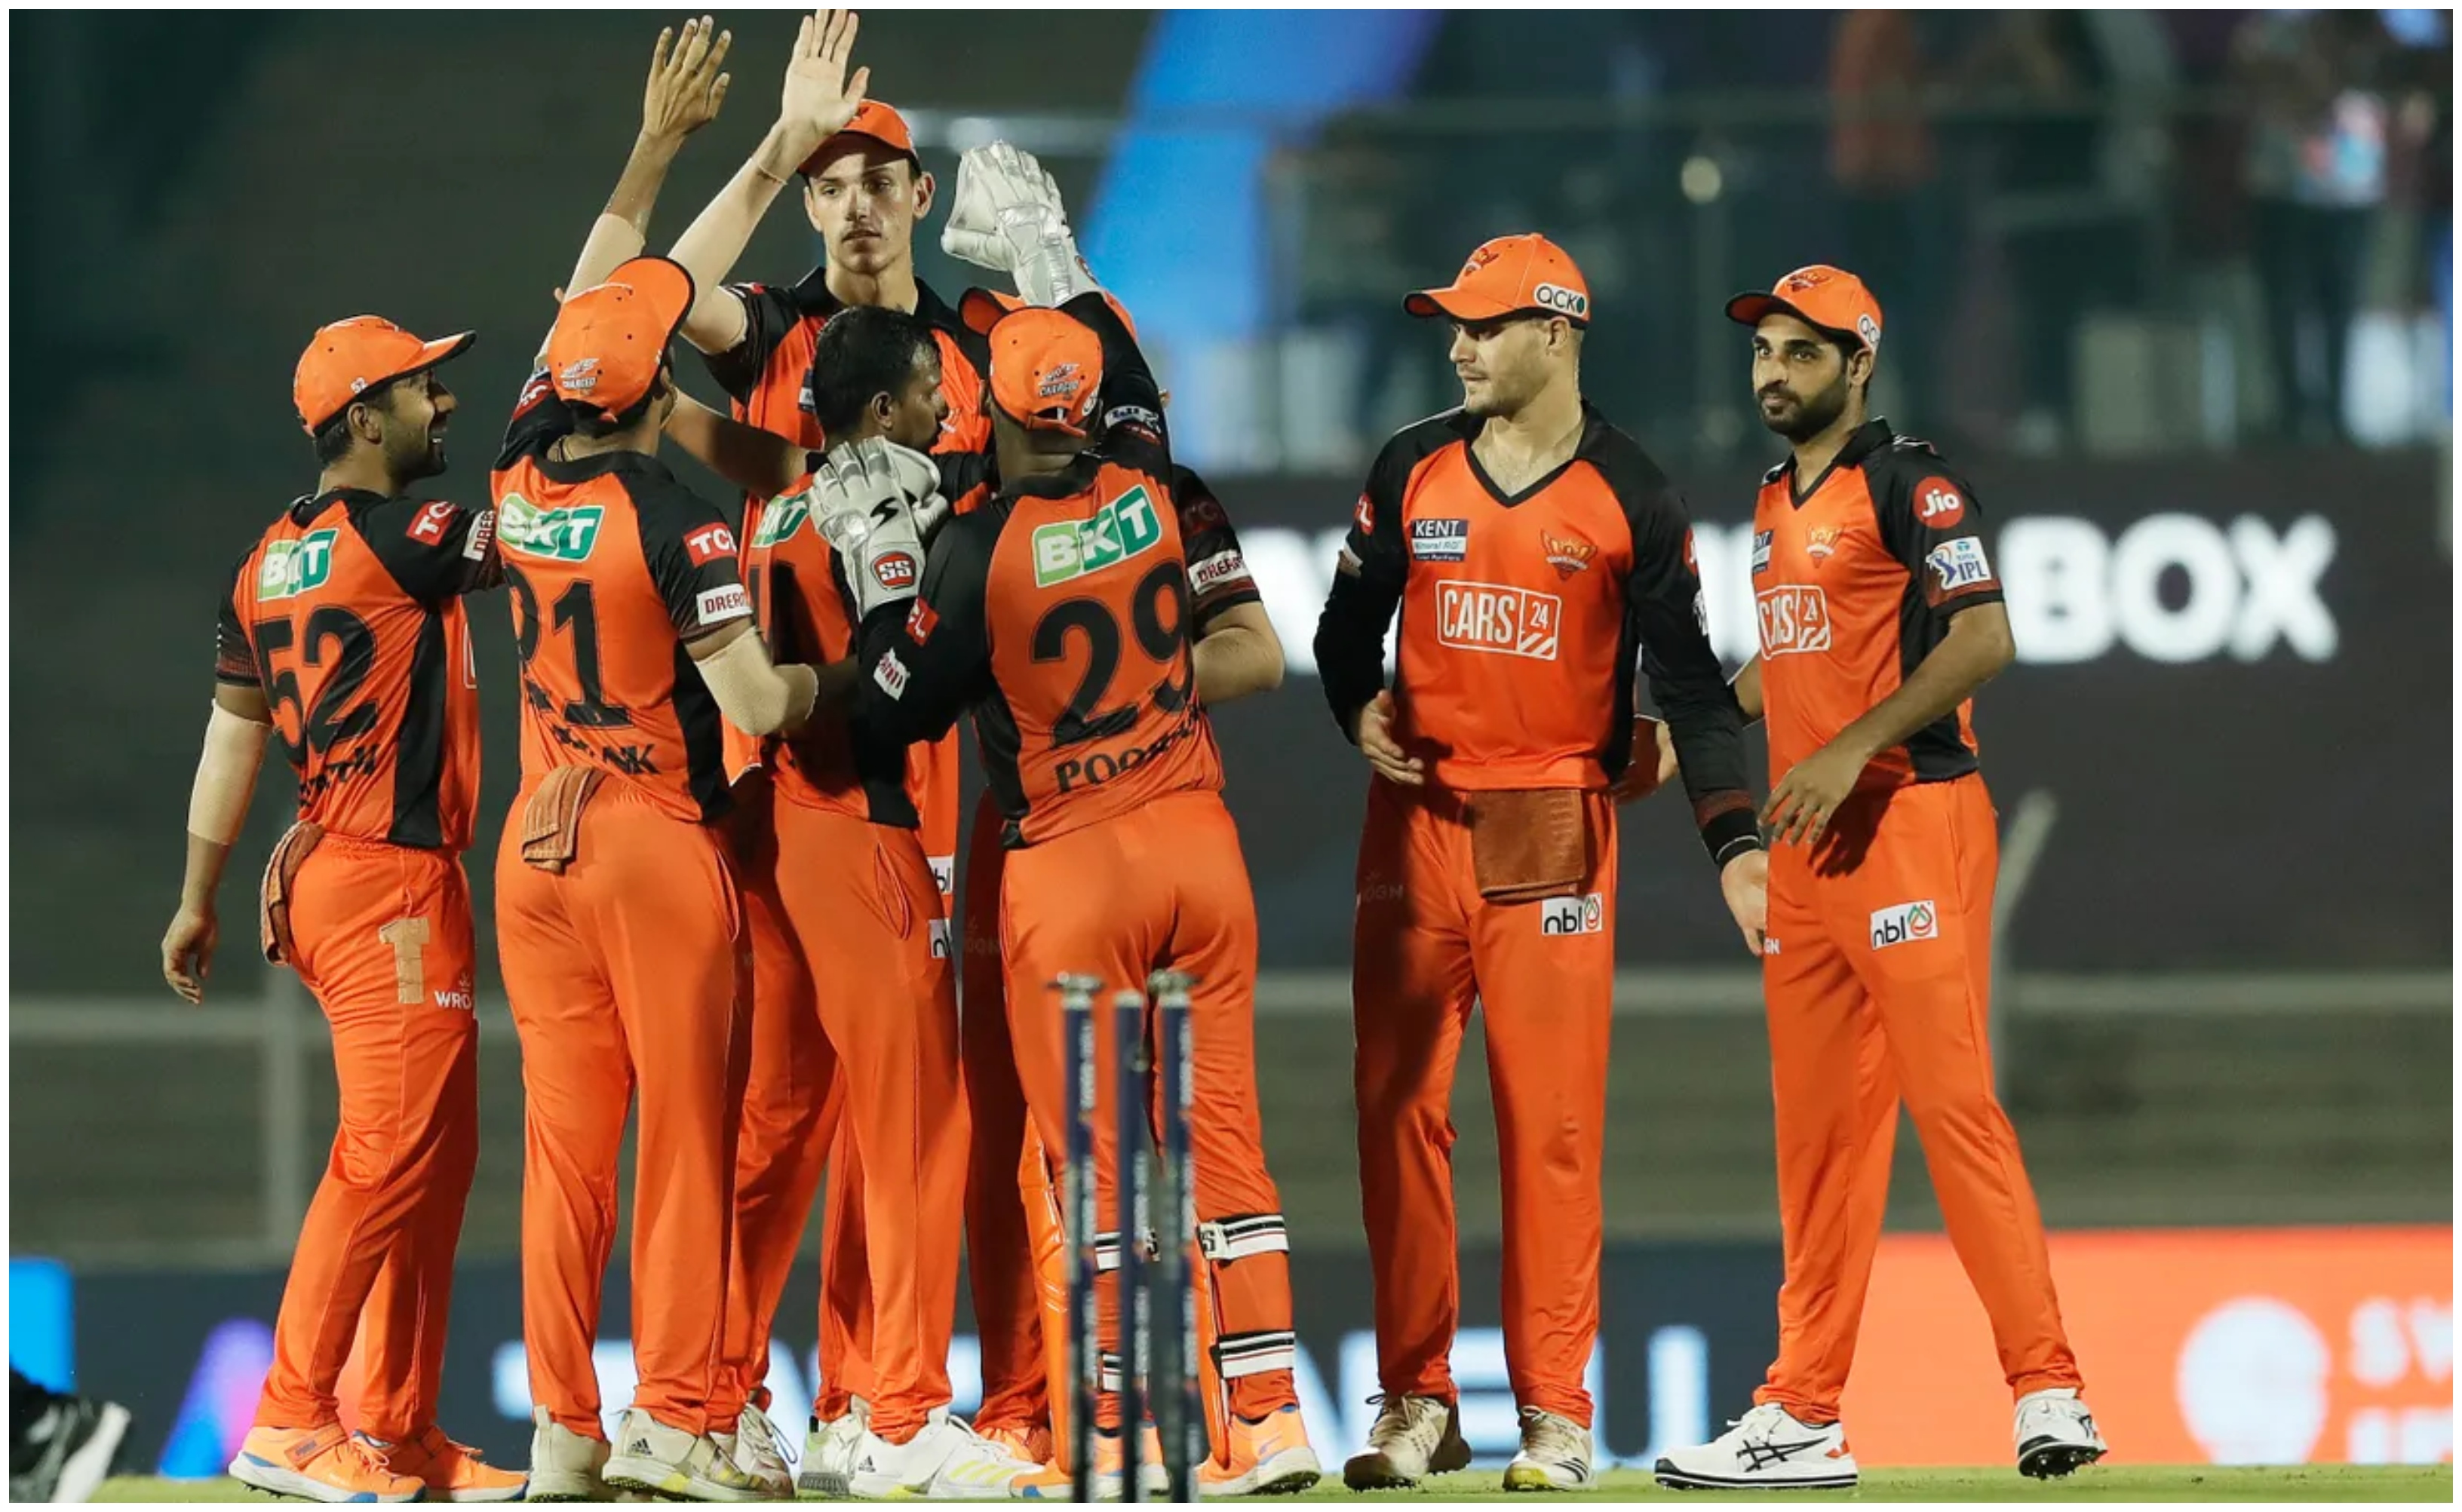 SRH outclassed RCB in all facets of the game | BCCI/IPL